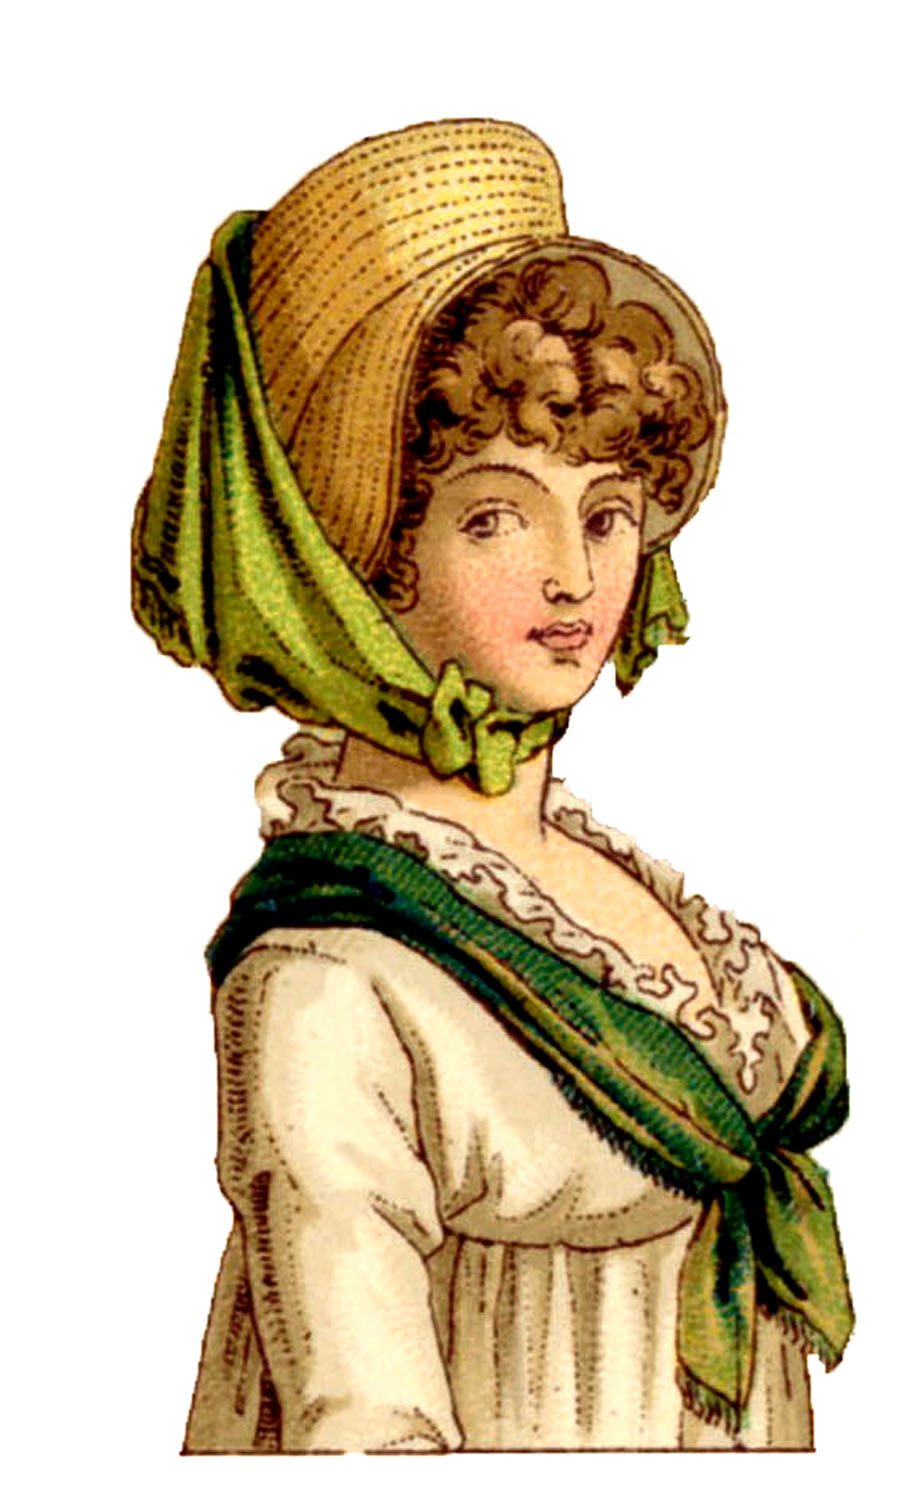 Vintage Graphics - More French Costume Ladies - The ...
 18th Century French Women